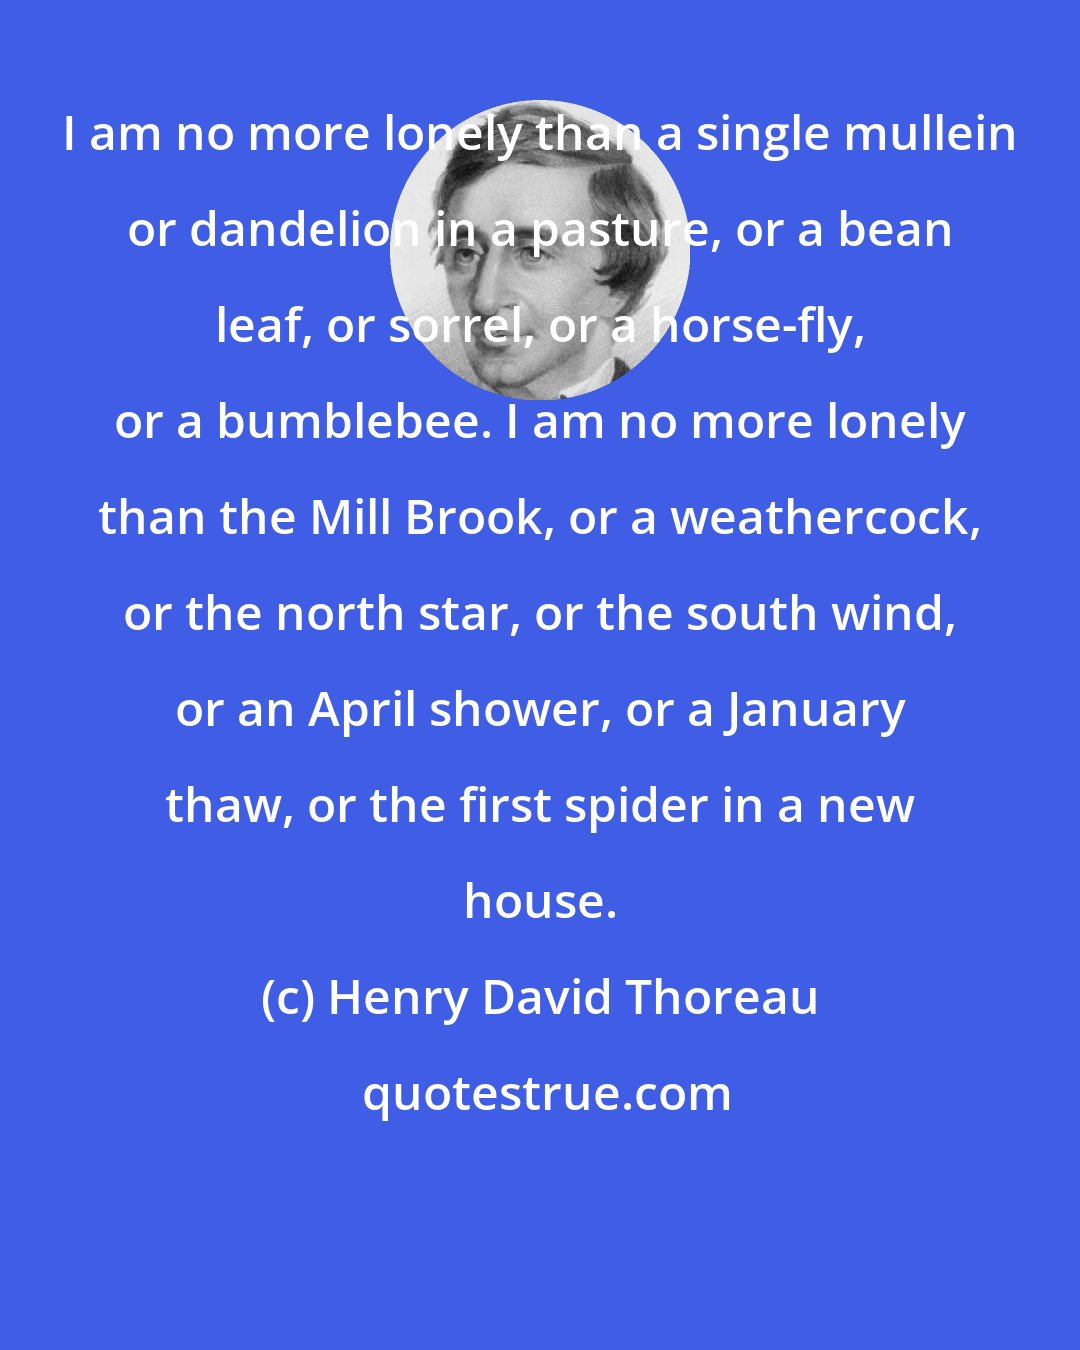 Henry David Thoreau: I am no more lonely than a single mullein or dandelion in a pasture, or a bean leaf, or sorrel, or a horse-fly, or a bumblebee. I am no more lonely than the Mill Brook, or a weathercock, or the north star, or the south wind, or an April shower, or a January thaw, or the first spider in a new house.